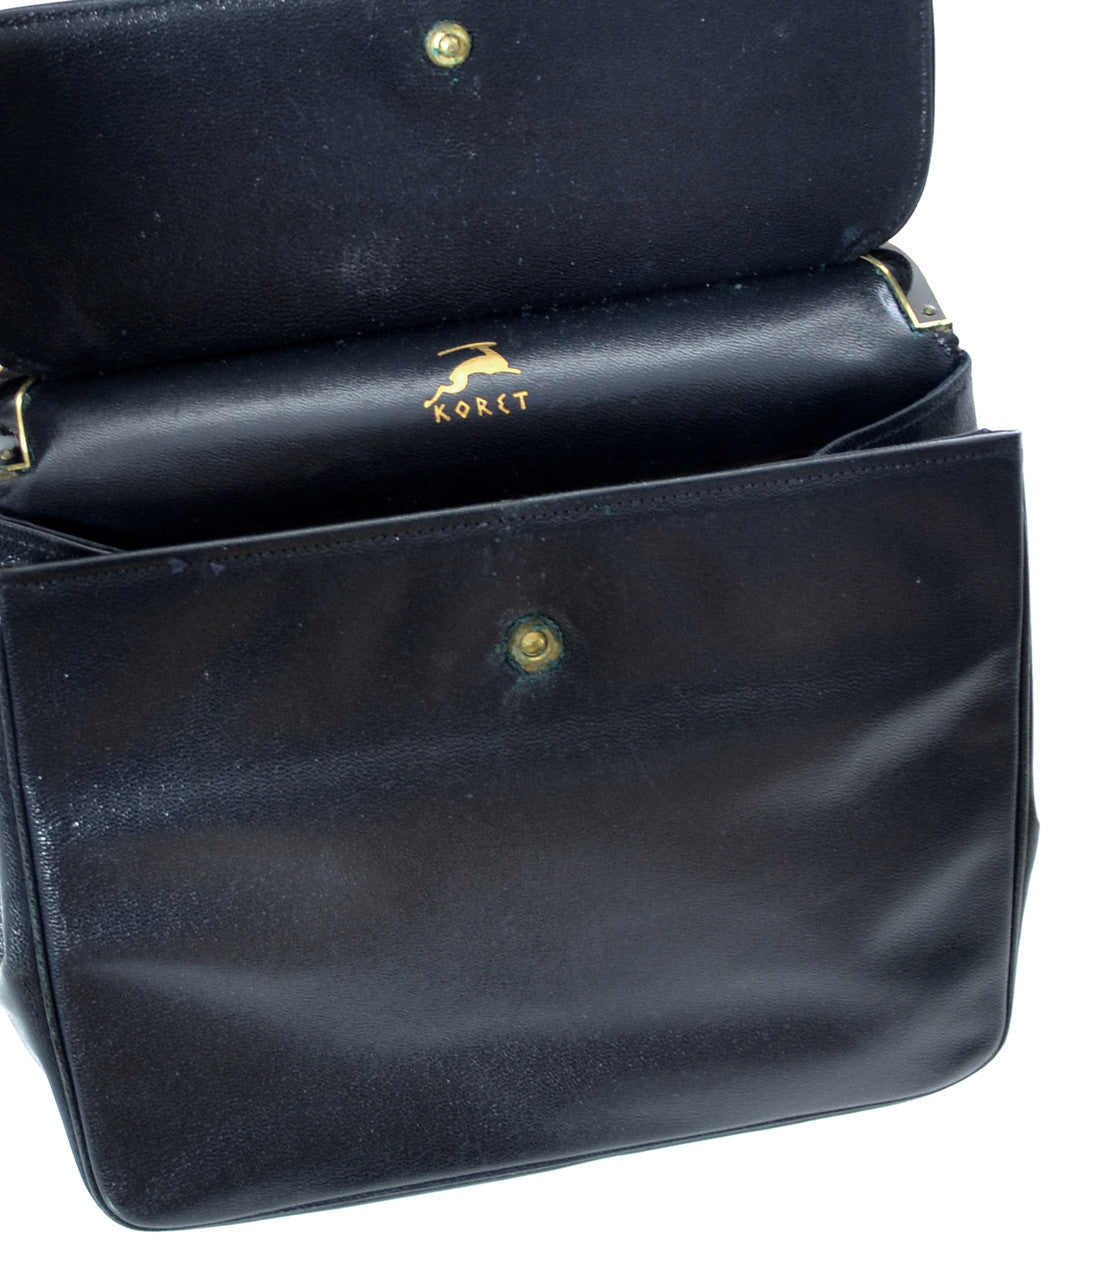 Extremely Rare, Vintage Pleated Black Satin Gucci Evening Bag